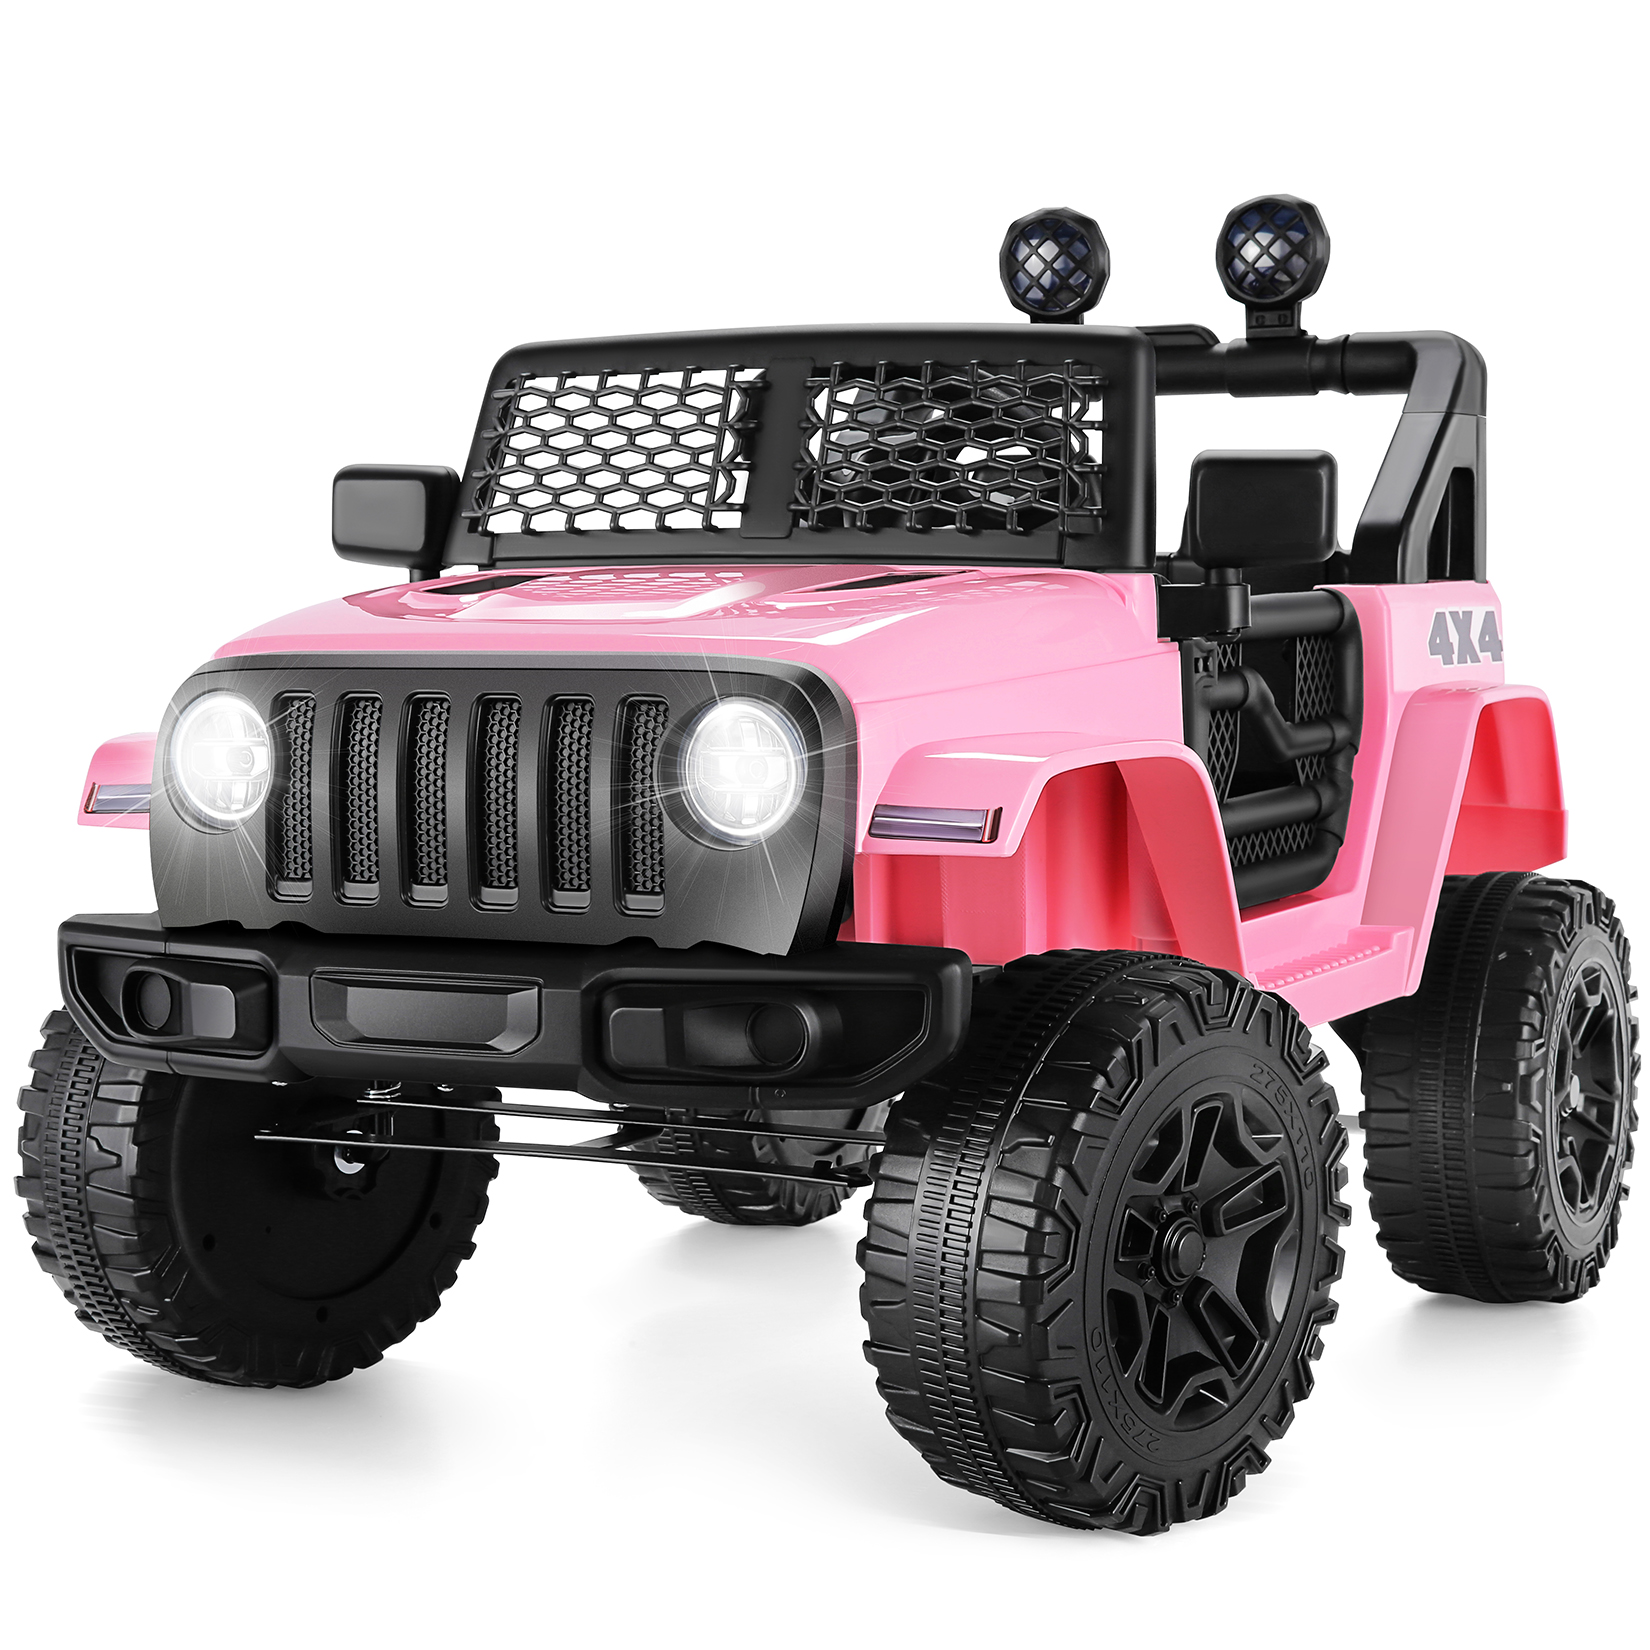 Funcid 12V 7AH Kids Powered Ride on Truck Car with Parent Remote Control, Bluetooth Music, Spring Suspension, LED Lights - Pink - image 1 of 11